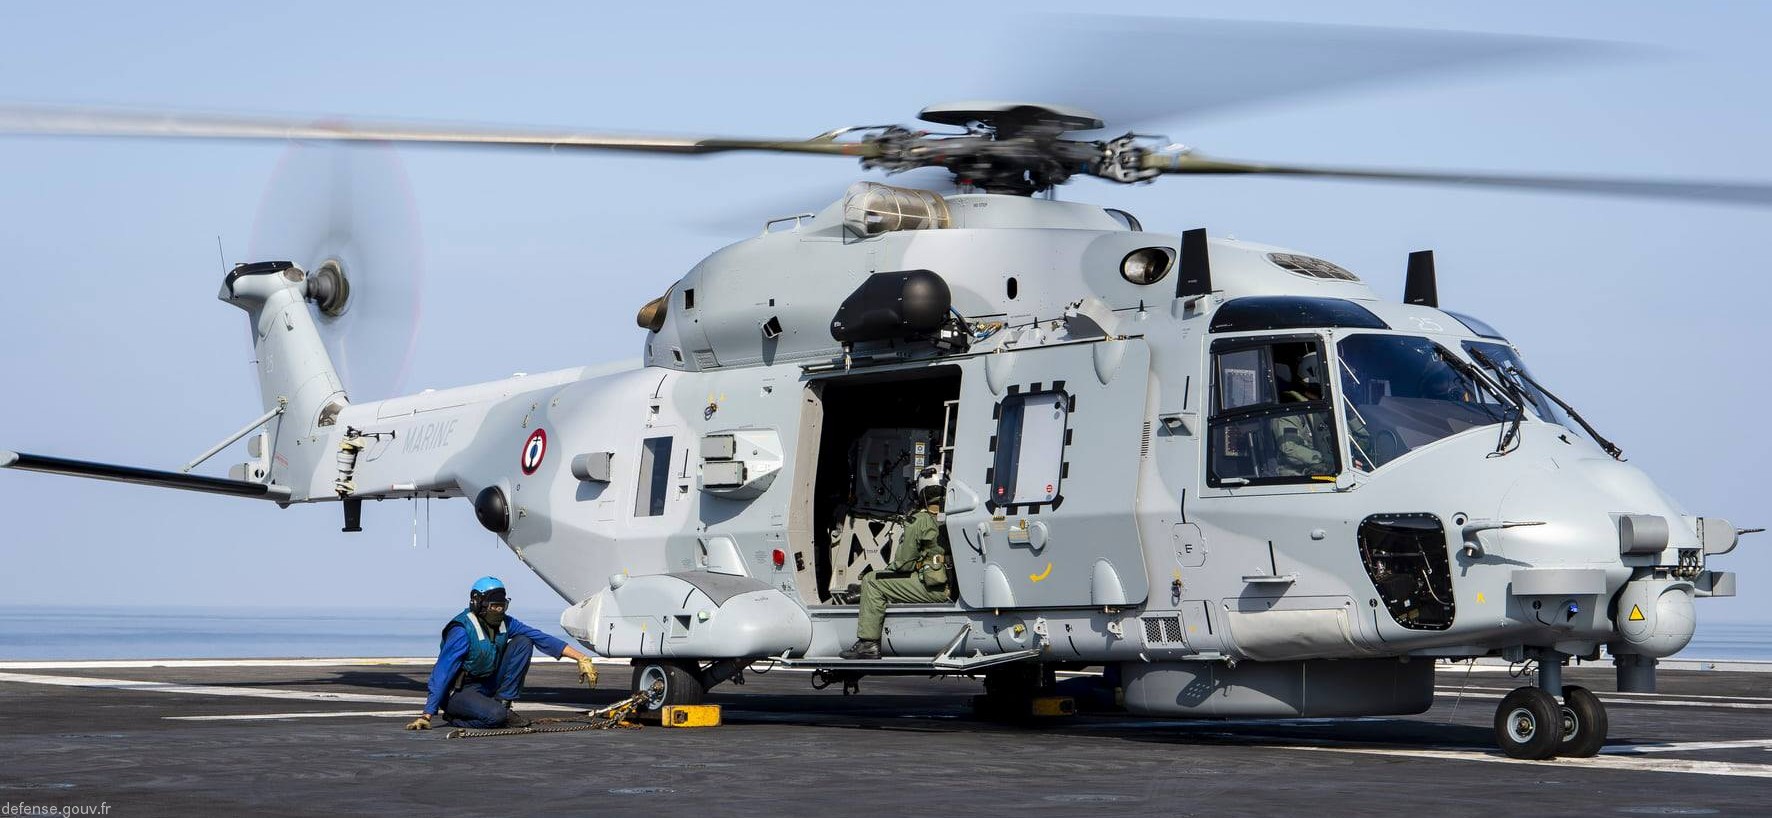 nh90 caiman nfh helicopter french navy marine nationale aeronavale flottille 31f 33f 66